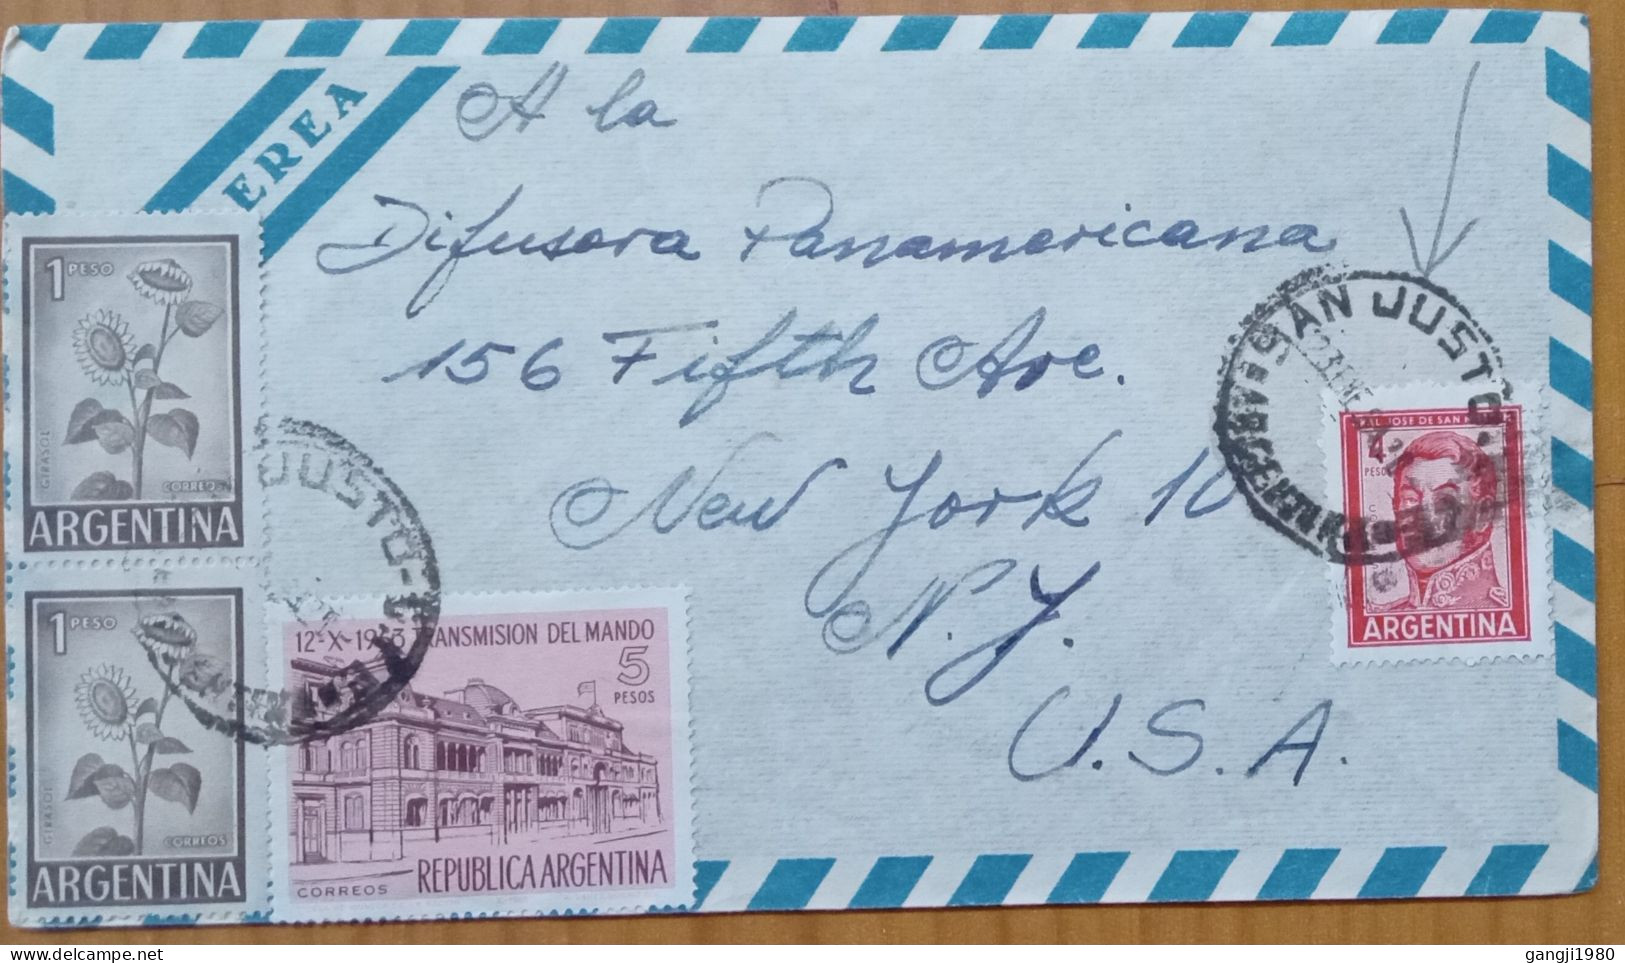 ARGENTINA 1964, COVER USED TO USA, 4 STAMP, SAN MARTIN,1963 GOVT. HOUSE BUILDING, SUNFLOWER PLANT, SAN JUSTO CITY CANCEL - Storia Postale